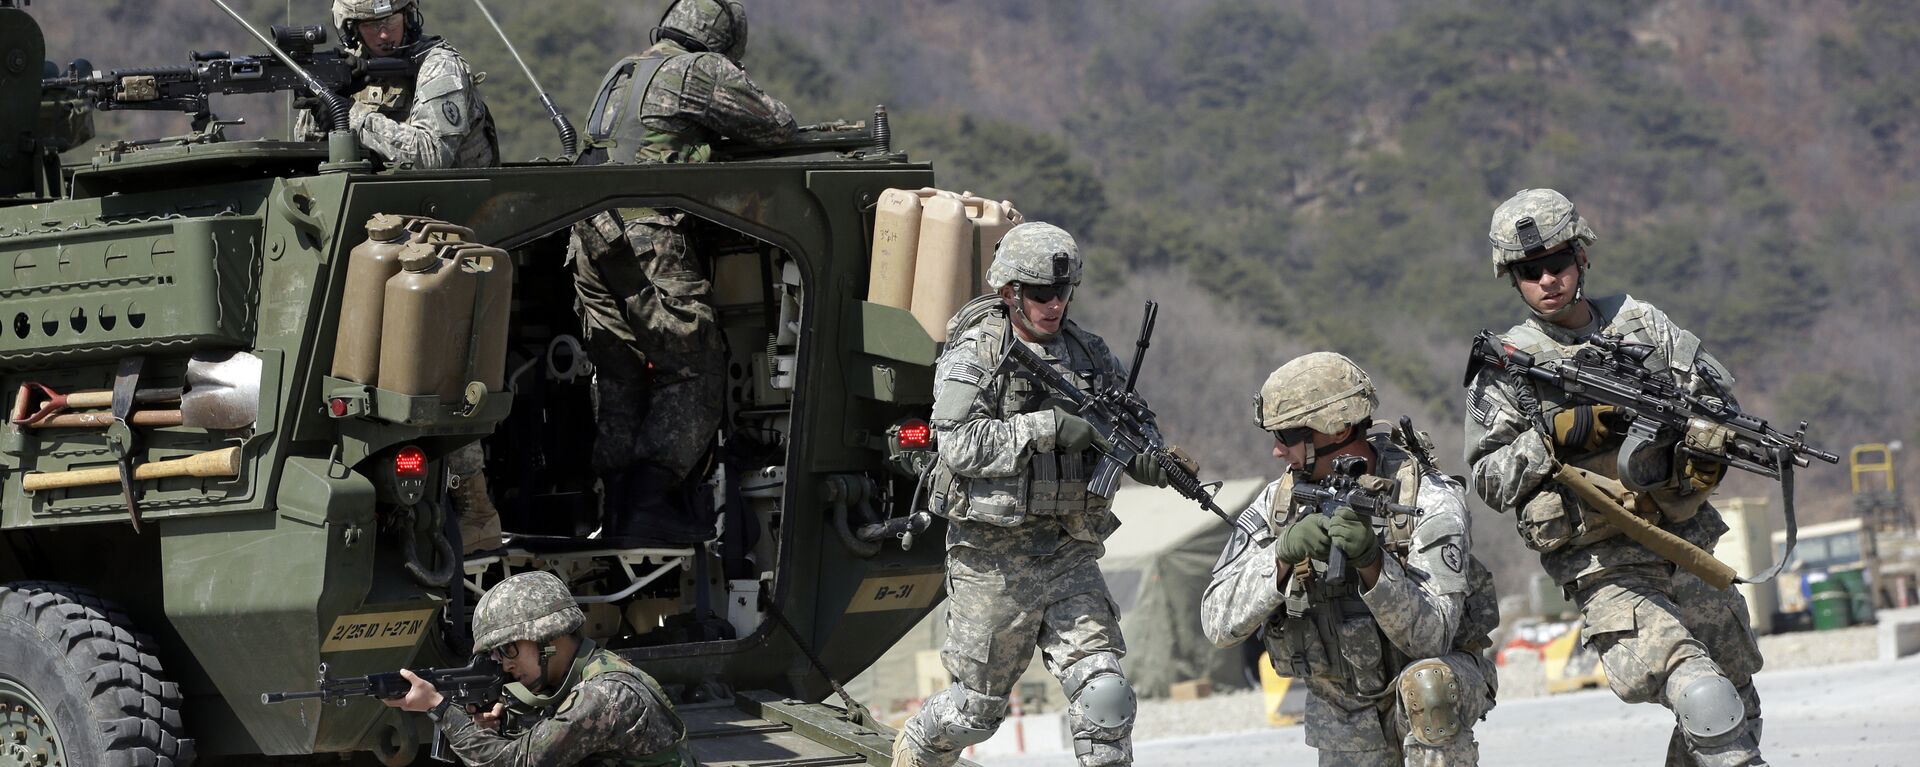 U.S. Army soldiers from the 25th Infantry Division’s 2nd Stryker Brigade Combat Team and South Korean soldiers take their position during a demonstration of the combined arms live-fire exercise as a part of the annual joint military exercise Foal Eagle between South Korea and the United States at the Rodriquez Multi-Purpose Range Complex in Pocheon, north of Seoul, South Korea. (File) - Sputnik International, 1920, 05.01.2024